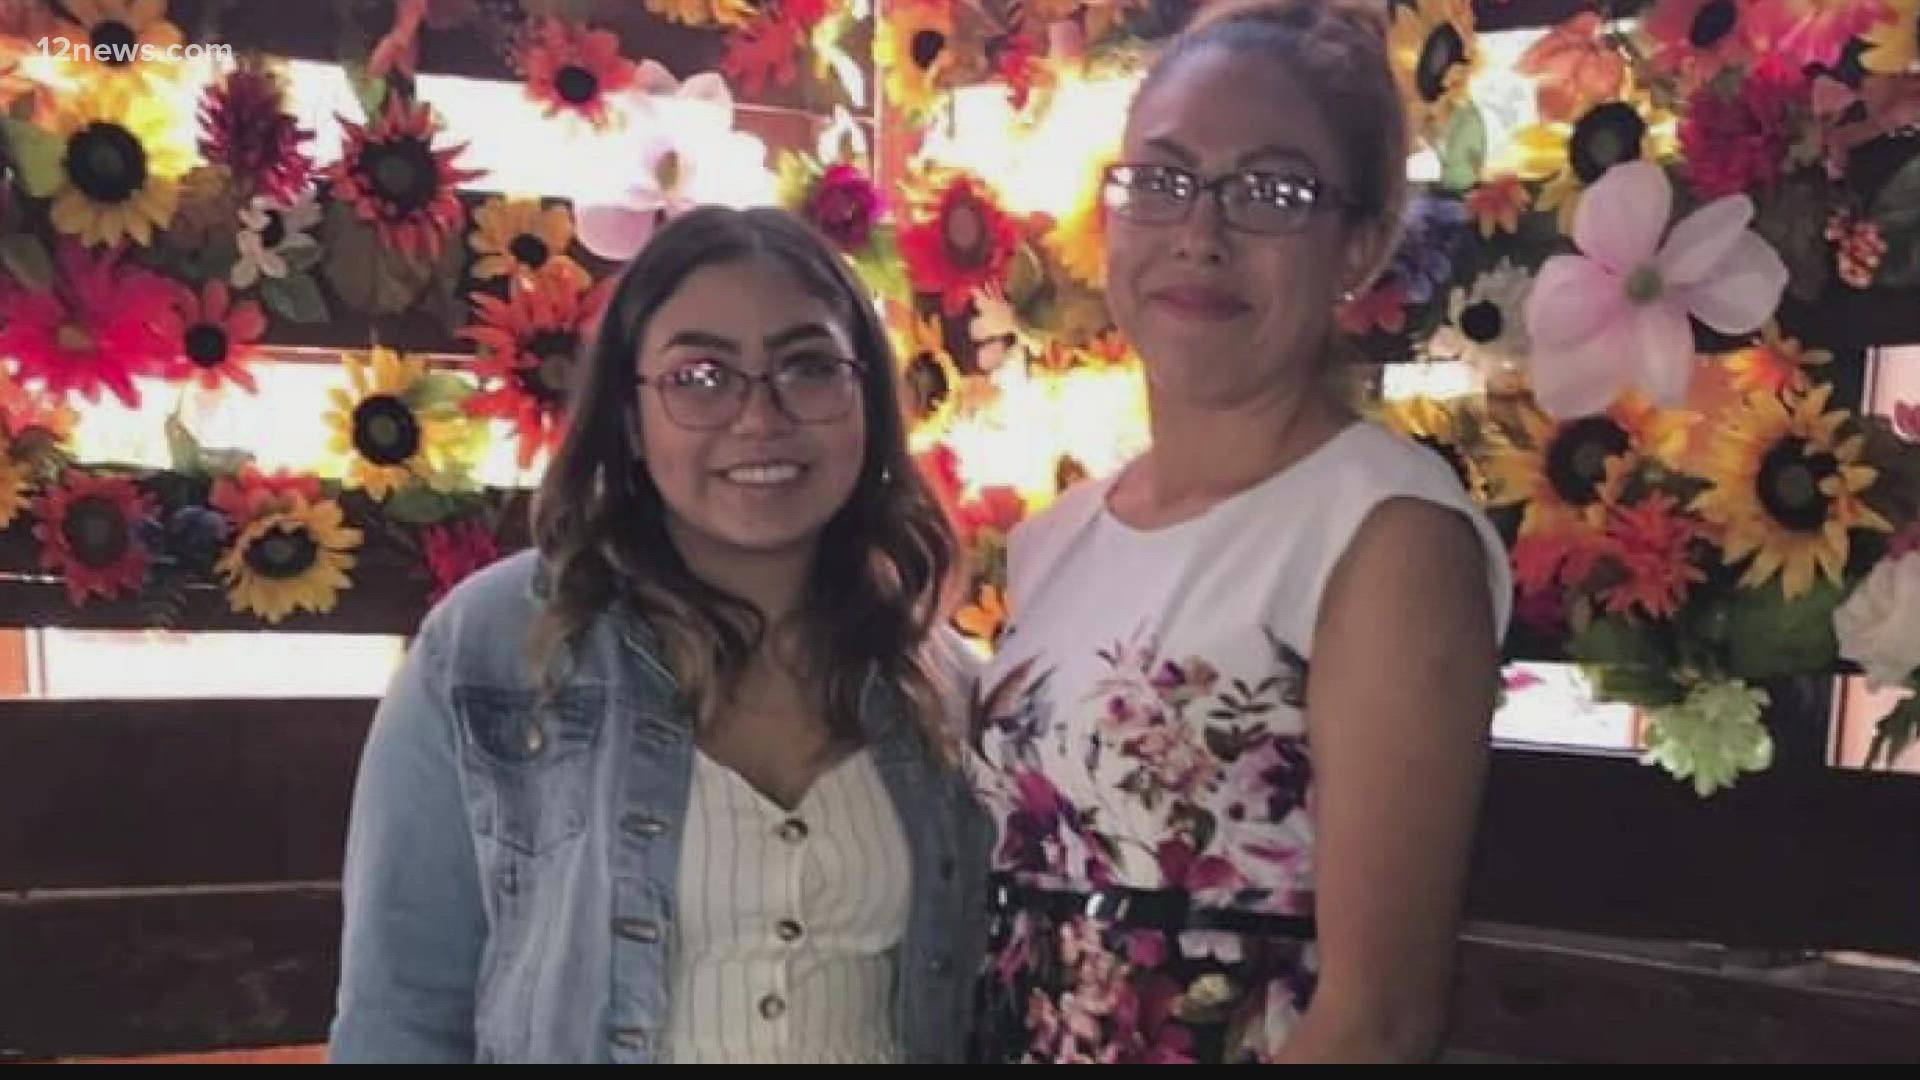 The community of Globe rallied around Lilly Machado, raising more than $140,000, to help her get a liver transplant. Lilly passed away in Mexico on Tuesday.